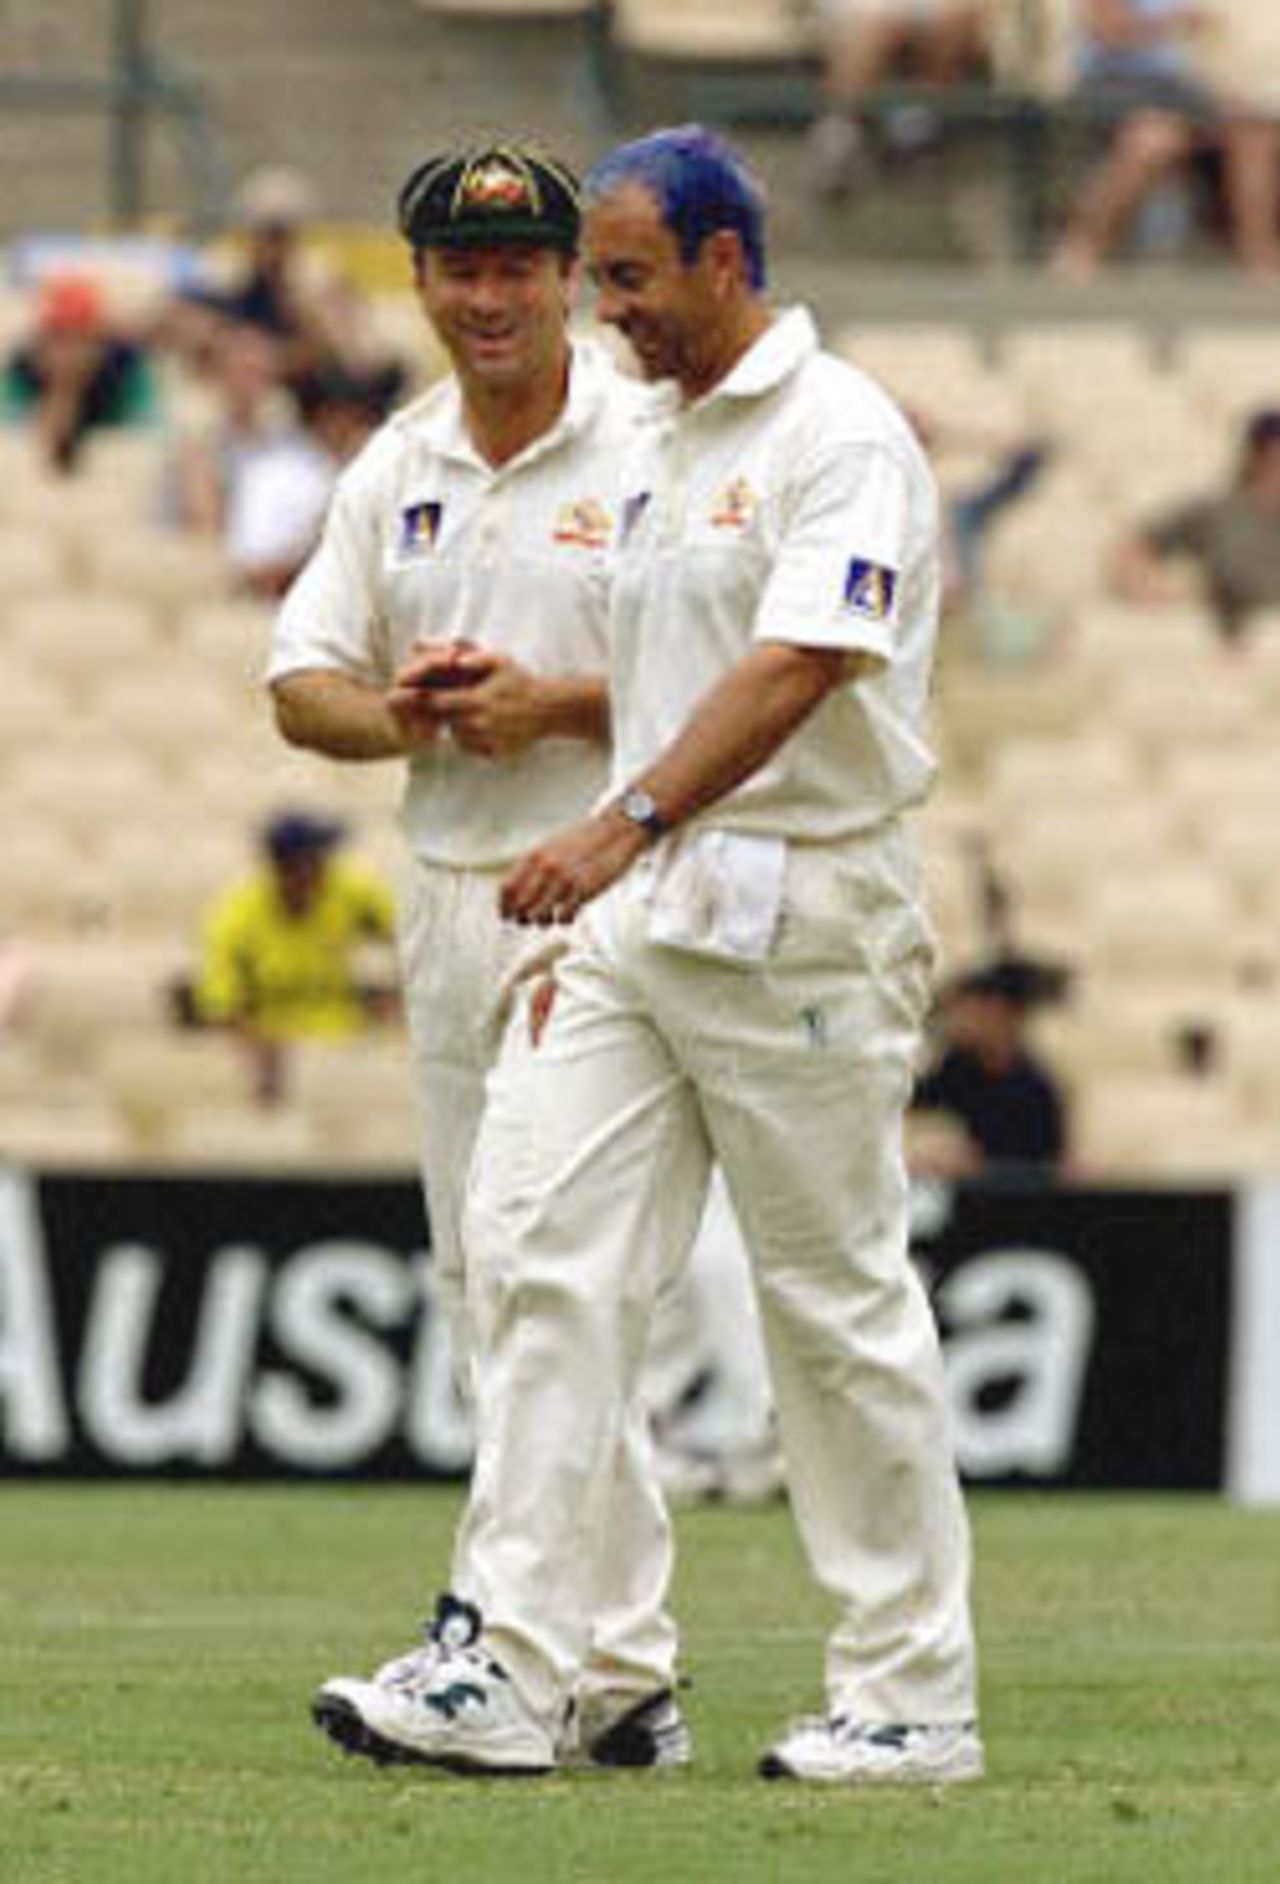 Australian captain Steve Waugh (L) chats with bowler Colin Miller (R) after he dropped a catch in the out-field from Brian Lara in the Federation test at the Sydney Cricket ground 05 January 2001. Miller took the wicket of Lara a few minutes later. Lara made 20 runs and the West Indies is currently 5- 190 in the second innings having forced the Australians into a second innnings.